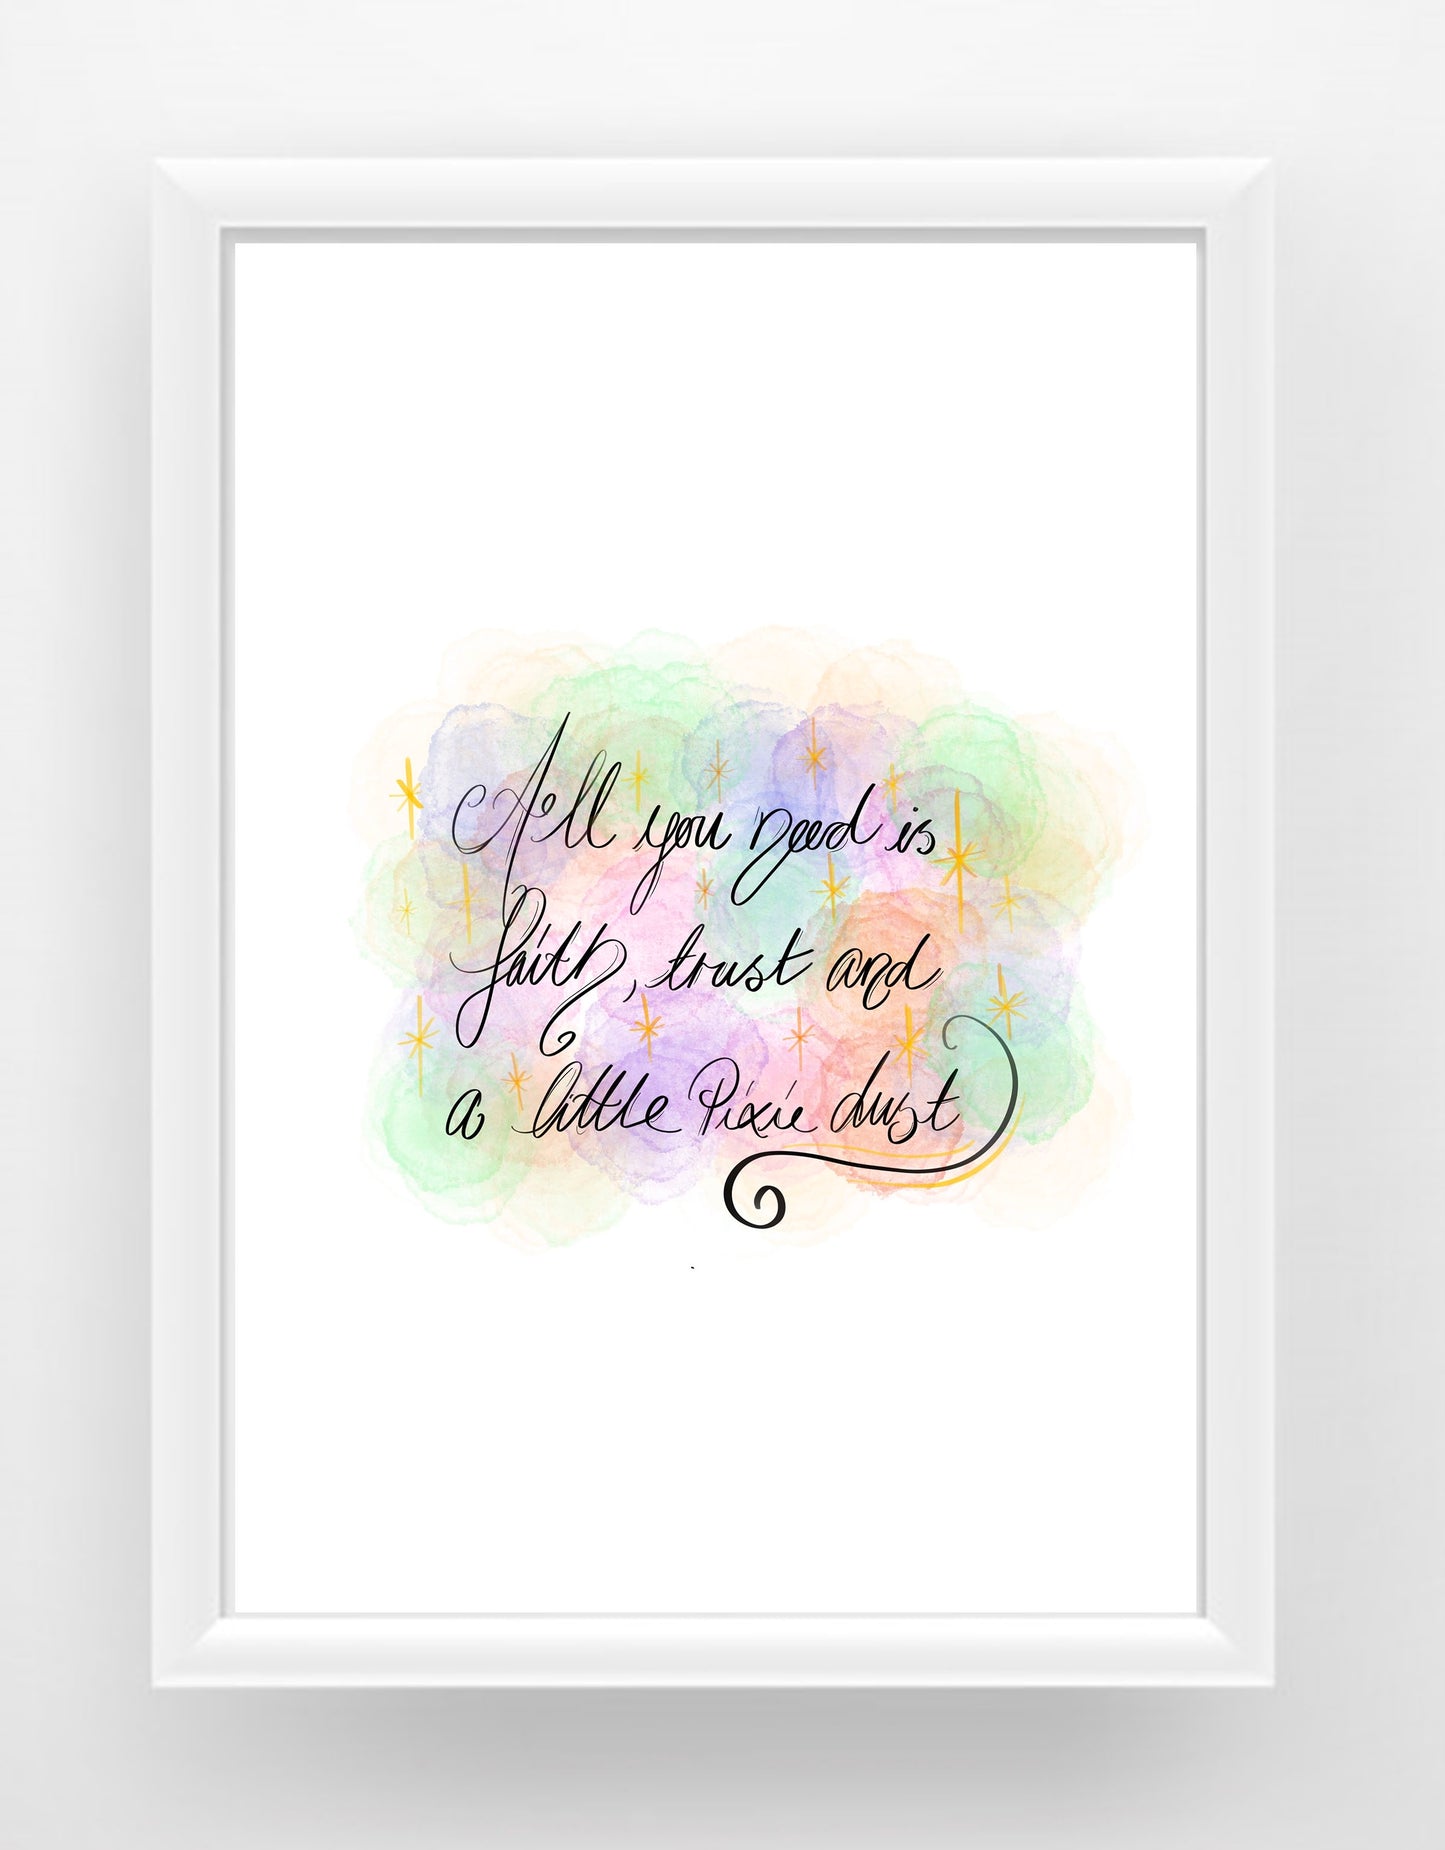 Peter Pan quote faith trust and pixie dust Print / Sticker / bookmark